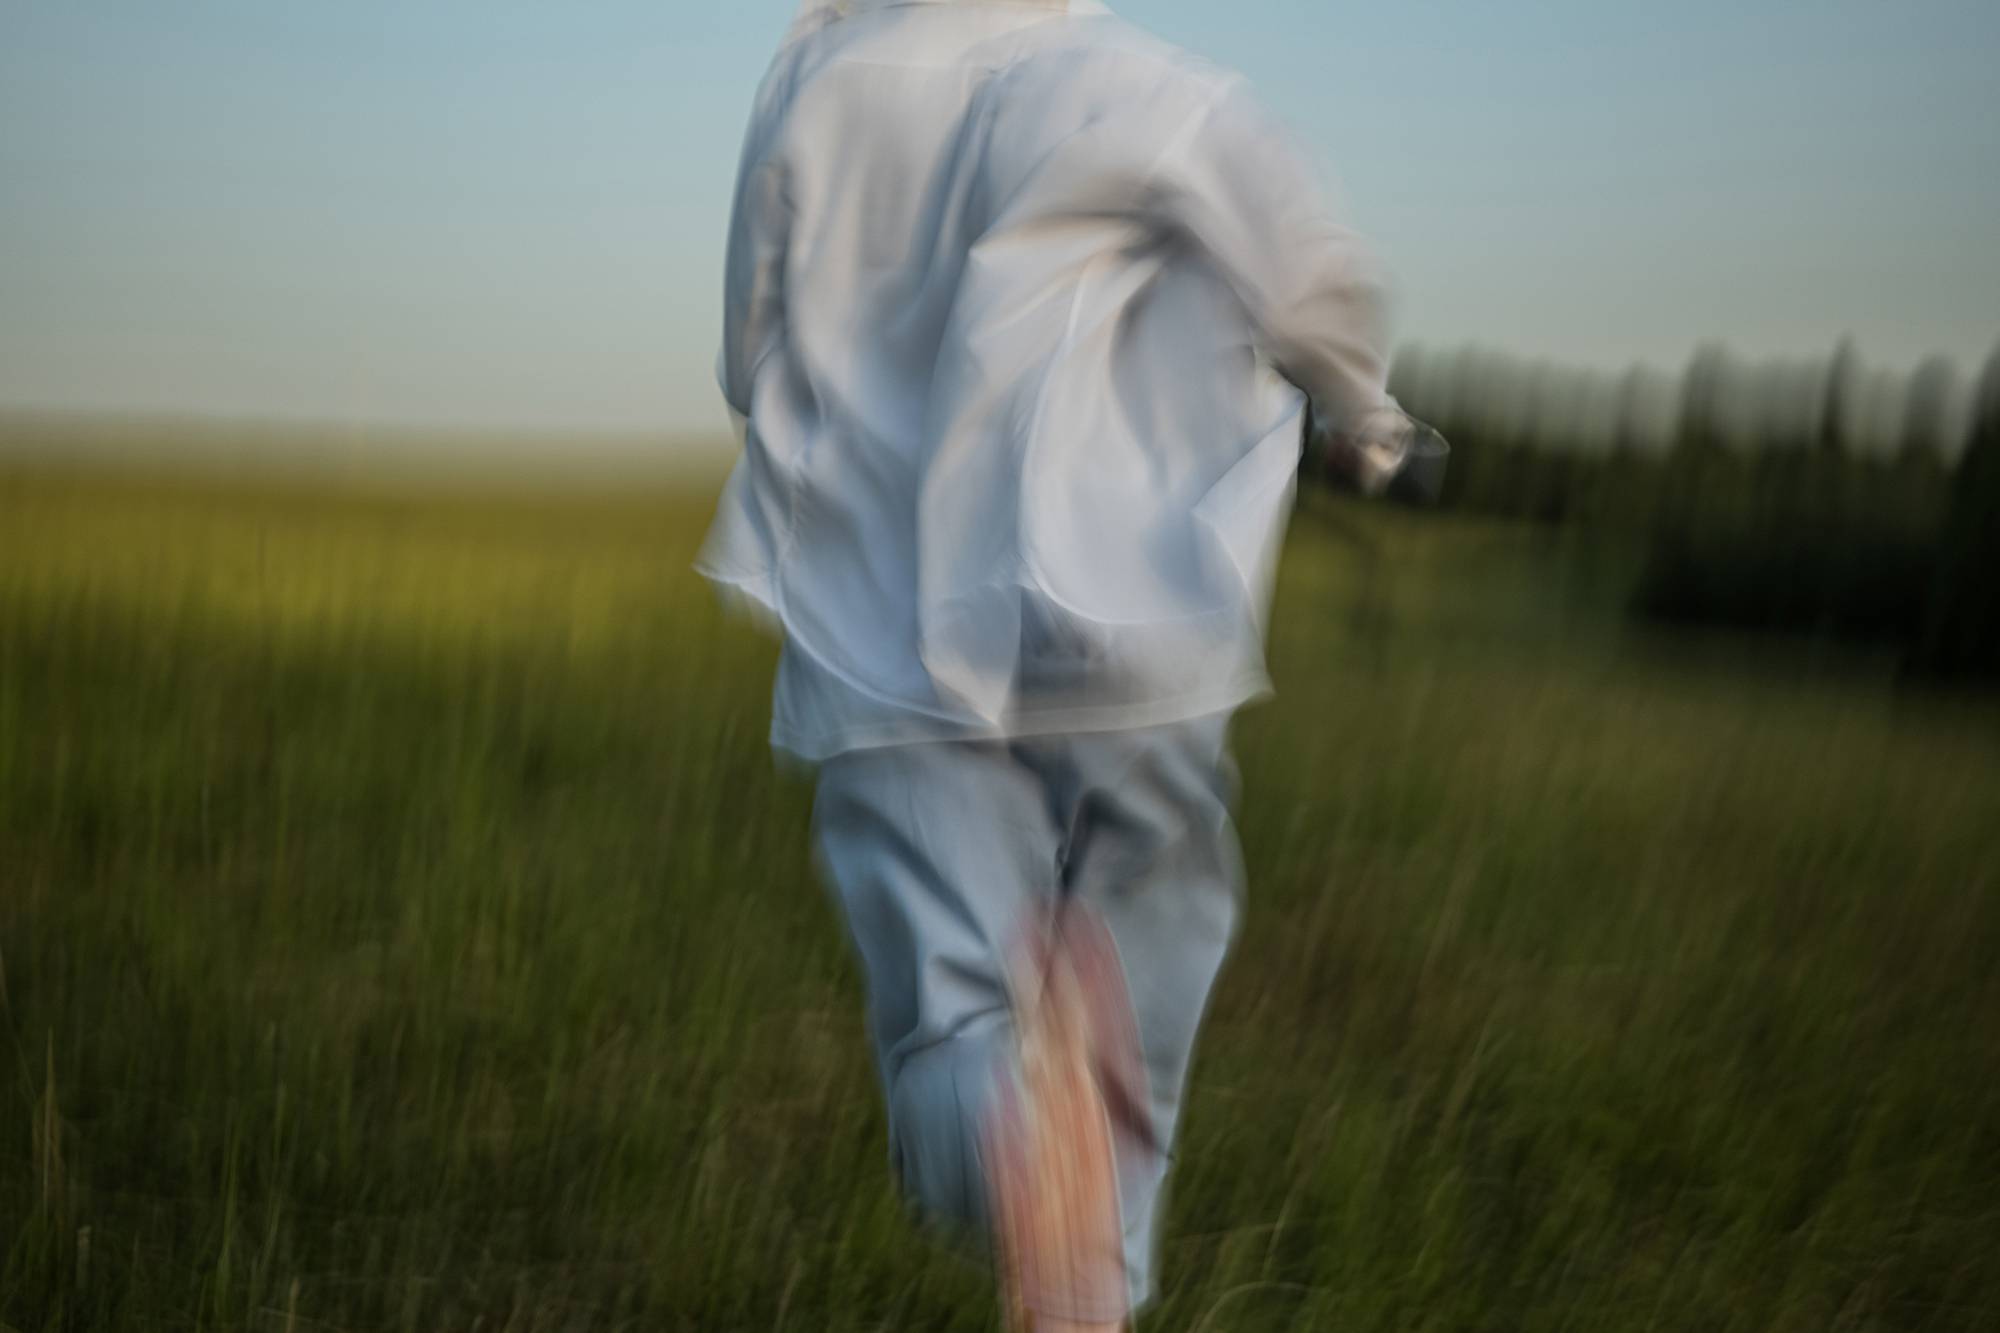 Running through the green grass of a spacious summer field. Emotional cinematic effect.